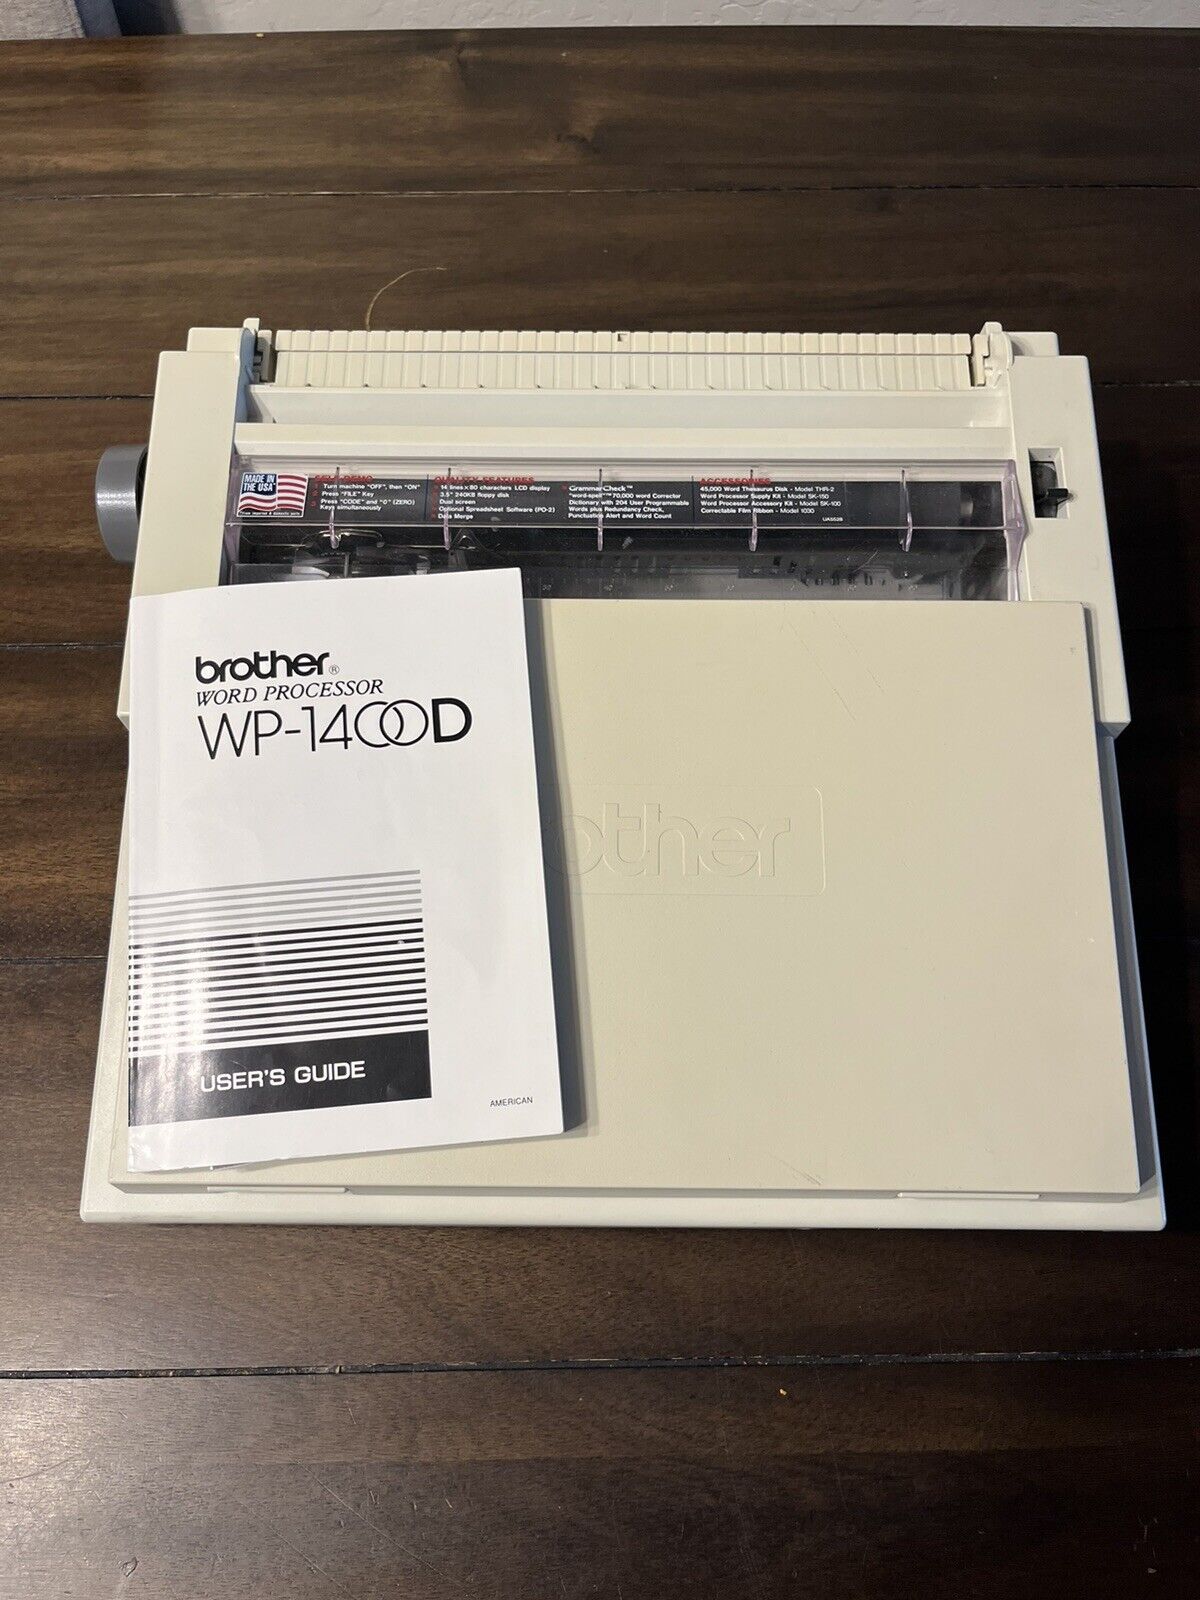 Brother Model WP-1400D Word Processor Electric Typewriter w/ GrammarCheck